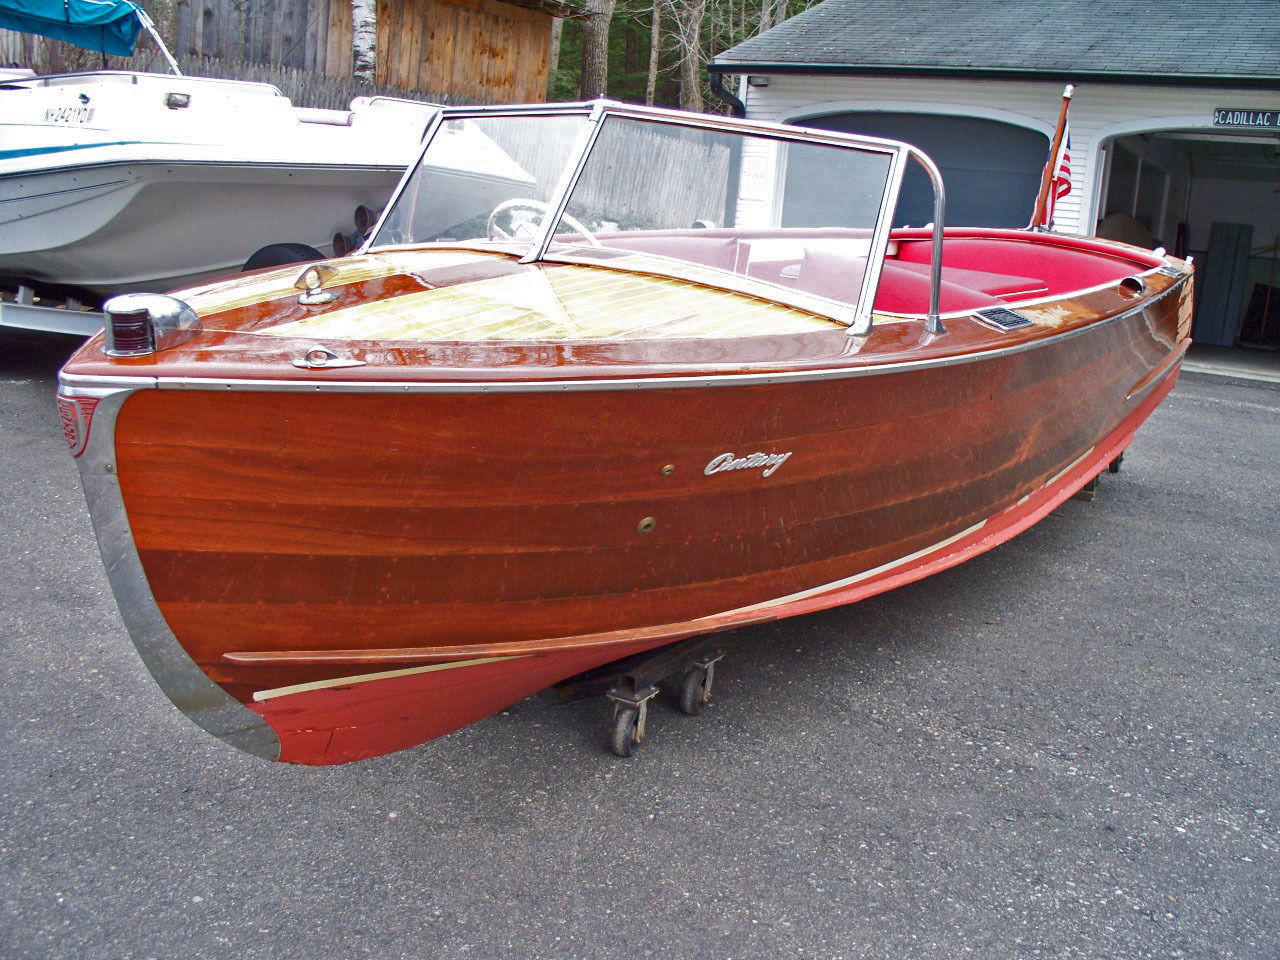 Century Resorter 1952 for sale for $14,000 - Boats-from ...